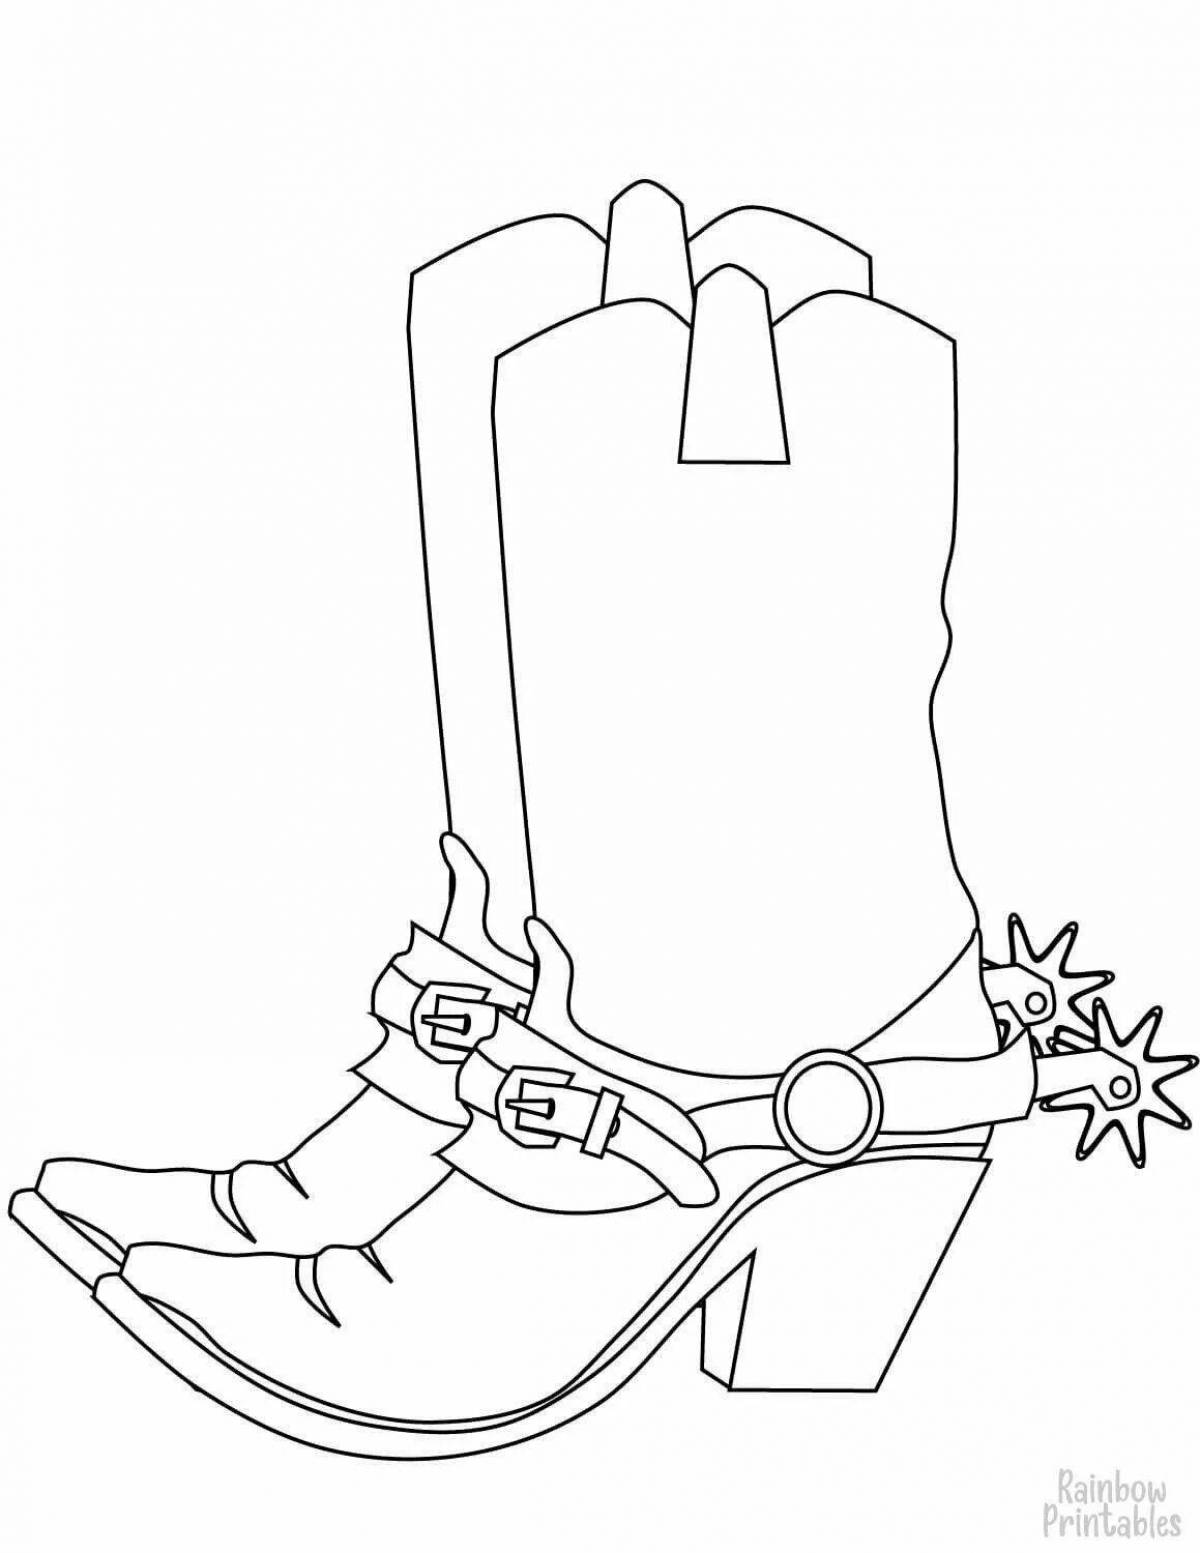 Great walking boots coloring page